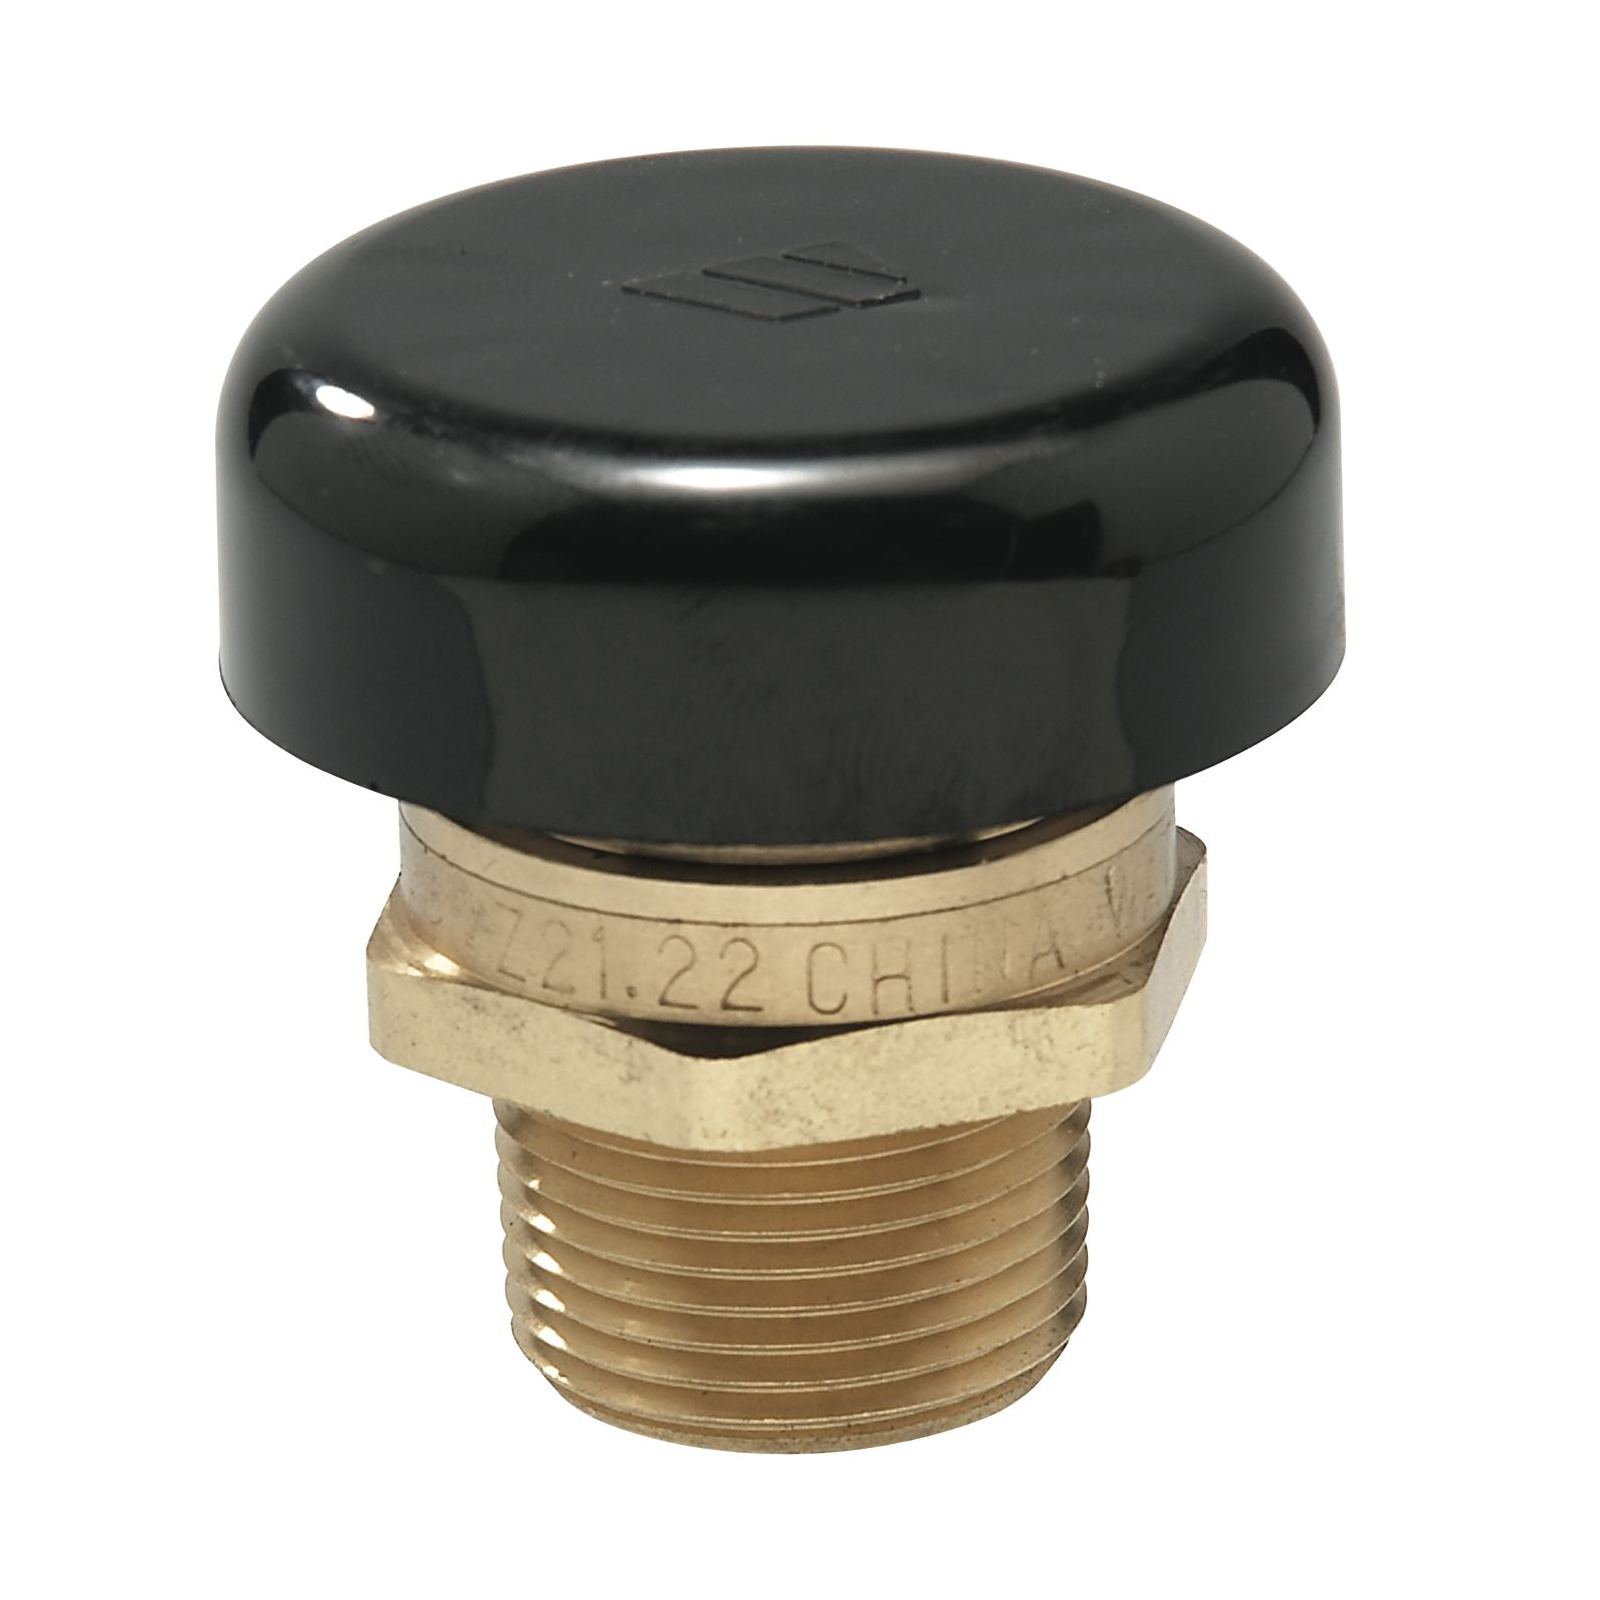 WATTS® 0556031 LFN36M1 Low Profile Vacuum Relief Valve, 3/4 in Nominal, MNPT End Style, 15 psi Pressure, 15 cfm Flow Rate, Brass Body, Import